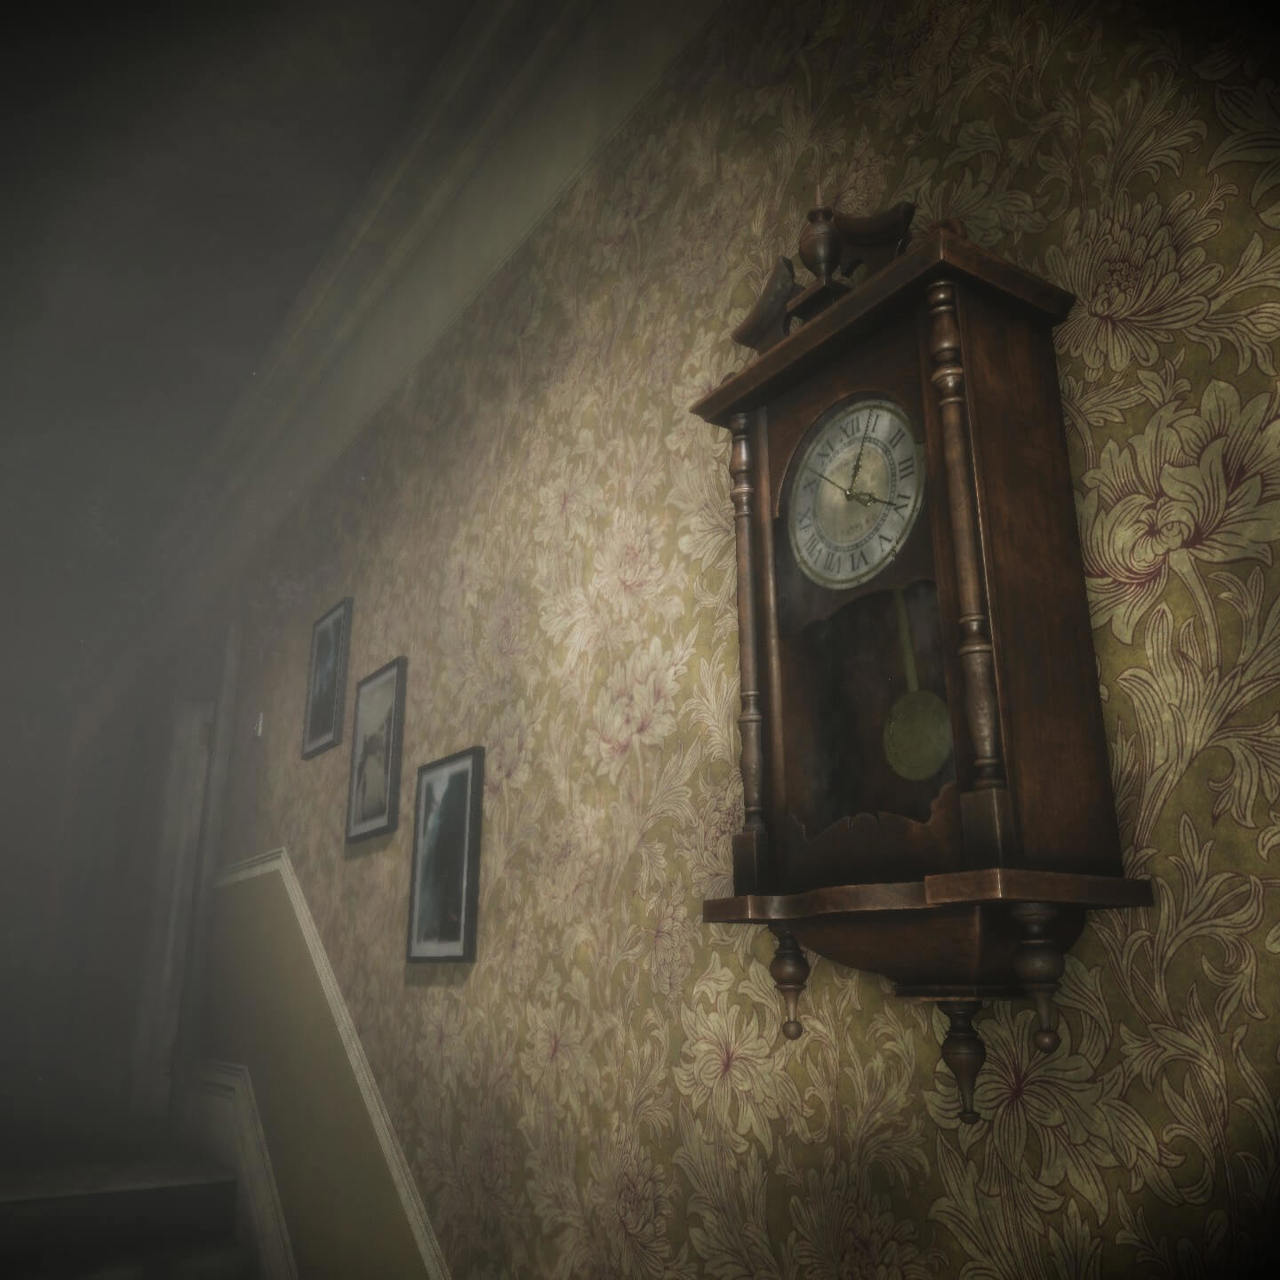 An old-fashioned clock on the wall of a dark house in Eternal Threads